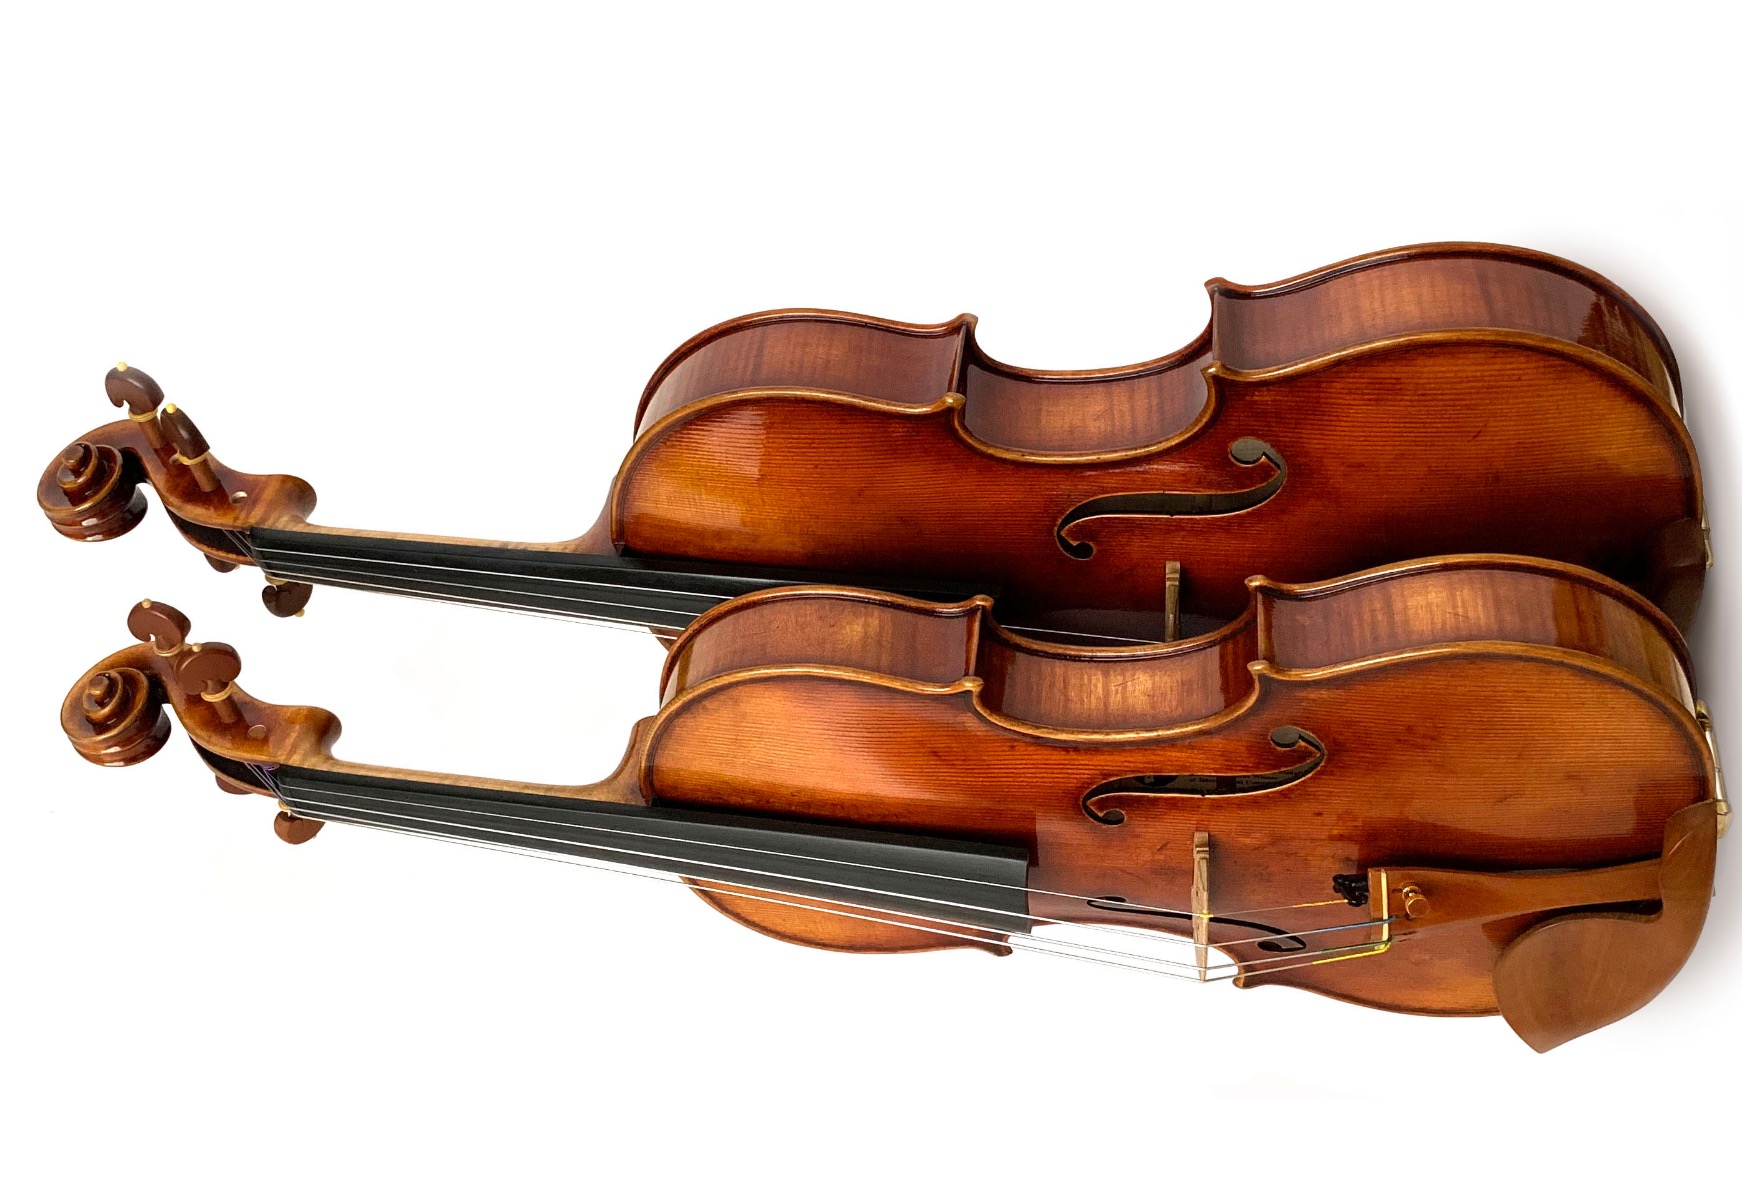 Violin and viola side by side, with the viola being larger